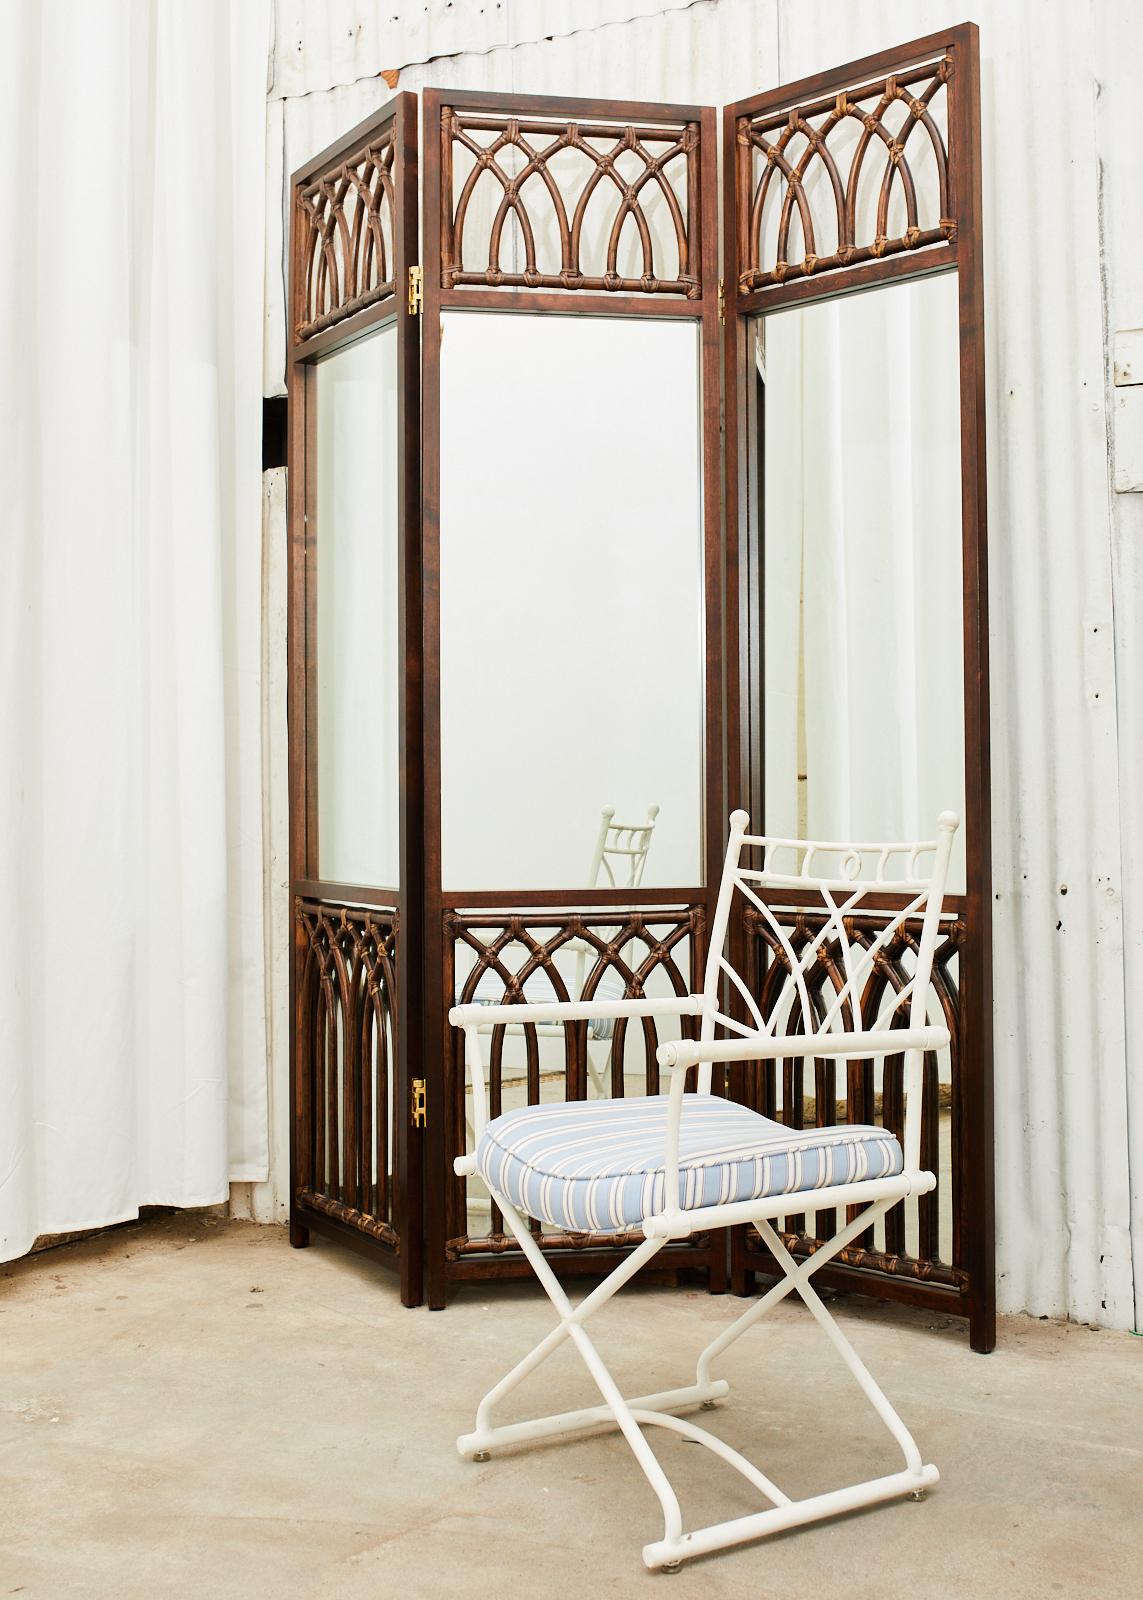 Handsome bamboo rattan folding three-panel dressing screen or room divider featuring a mirrored back. Hand-crafted by McGuire in the California organic modern style having a mahogany frame decorated with bamboo rattan poles in a gothic lancet arch